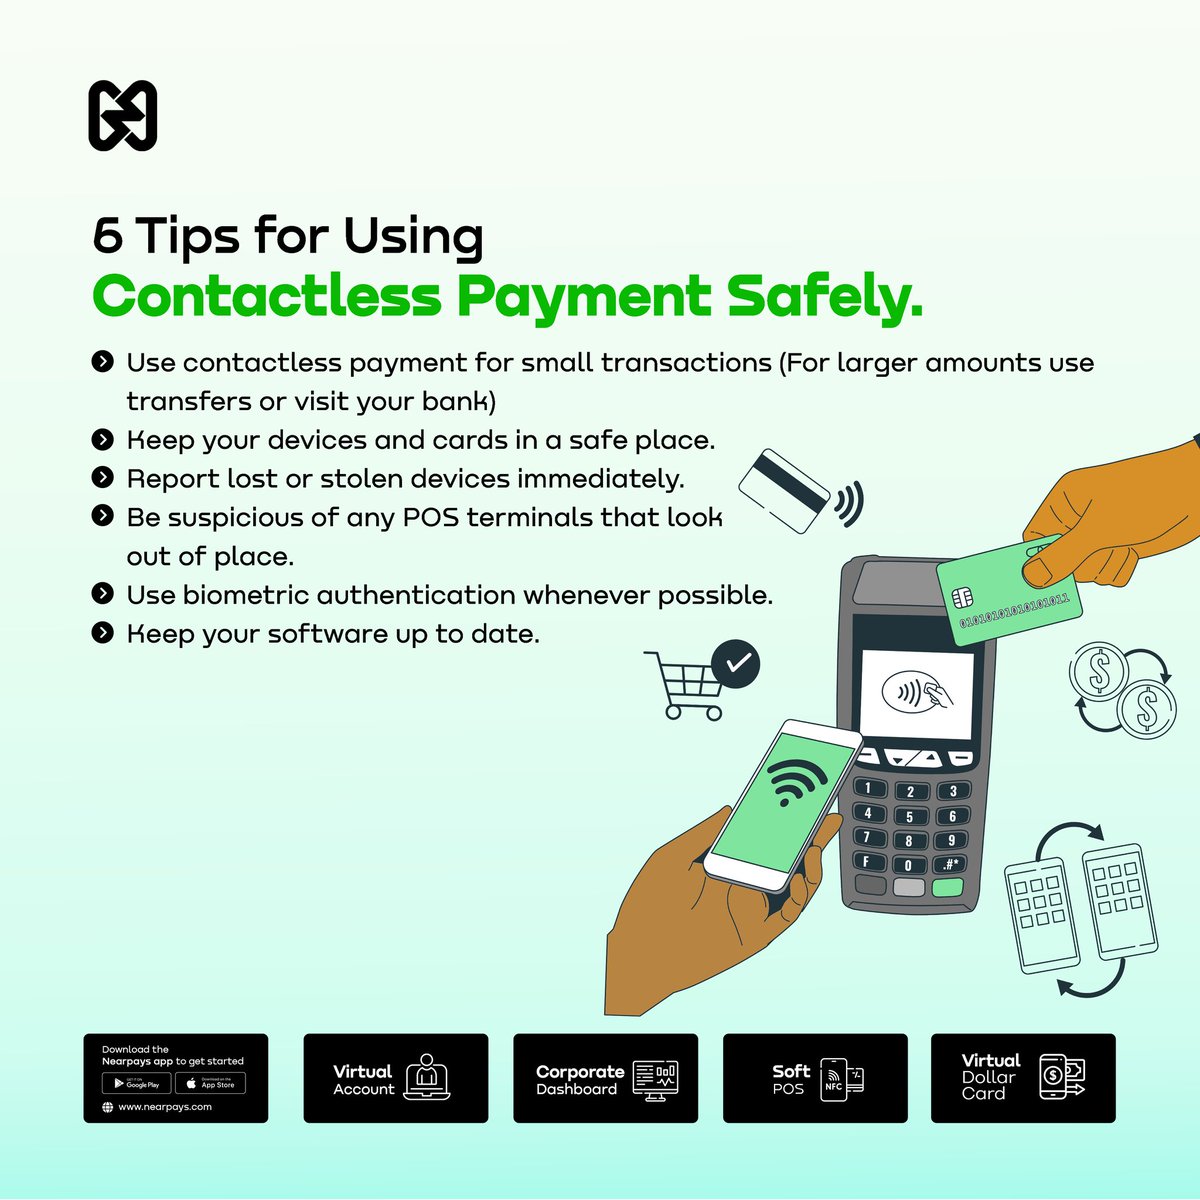 Tap & pay securely!   Master these 6 tips for using contactless payments safely. Like - Comment - Share if you found this helpful.

#Nearpays #softpos #finance #fintech #payments #mobilepos #ussd